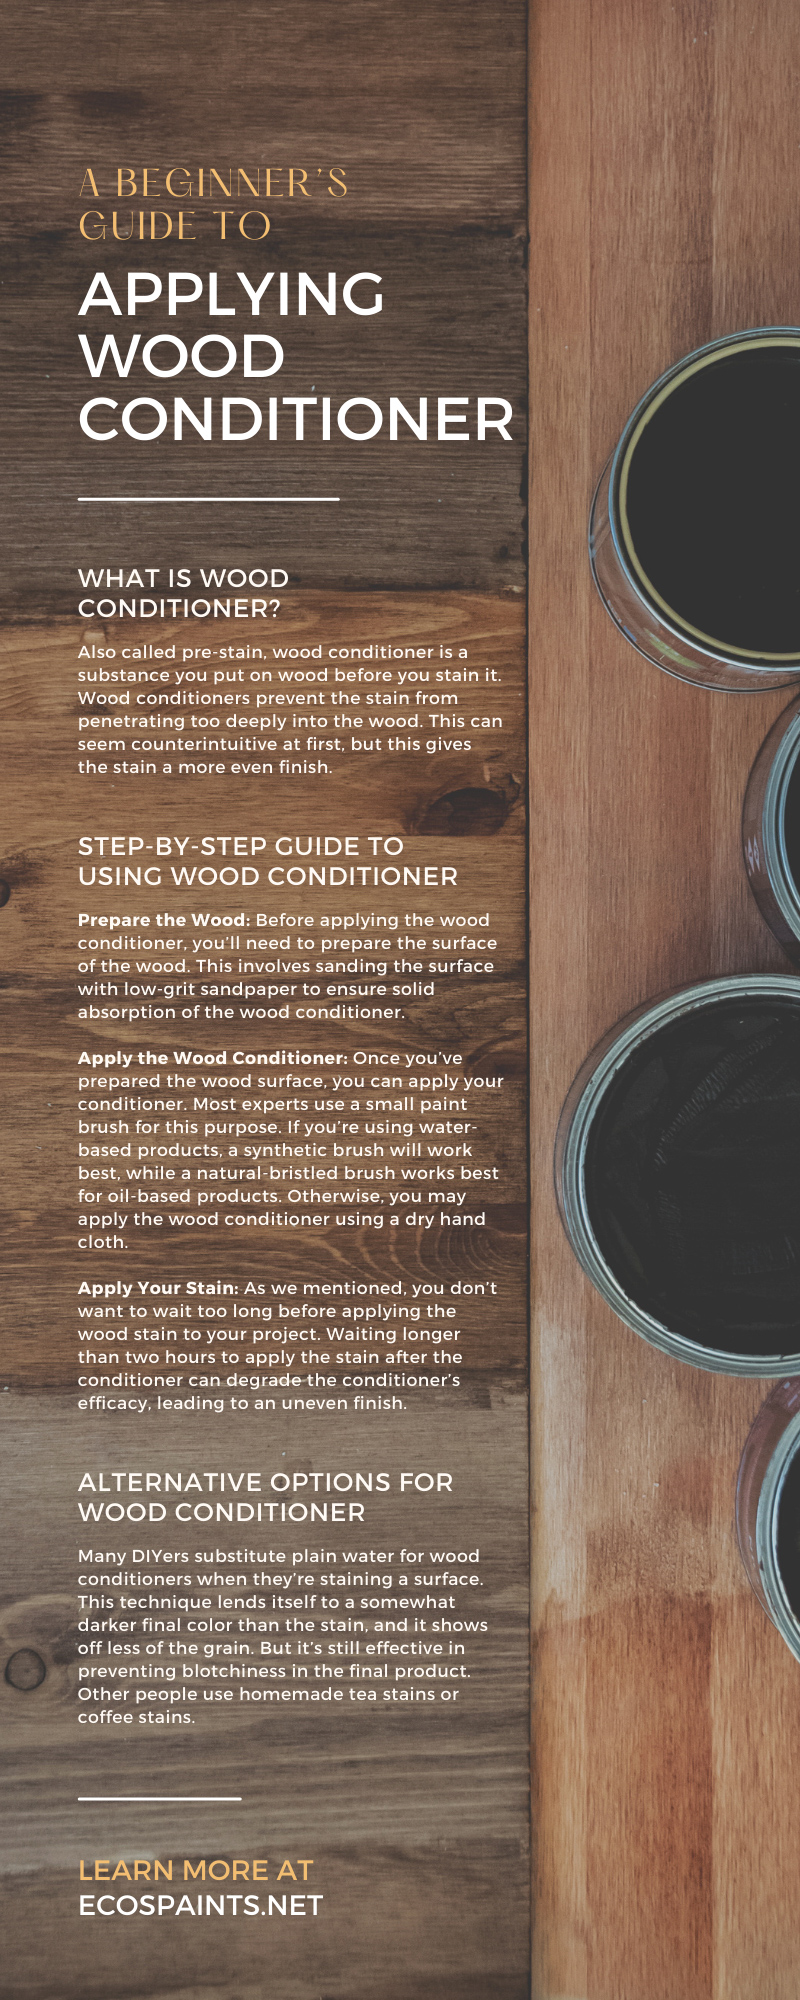 A Beginner’s Guide to Applying Wood Conditioner